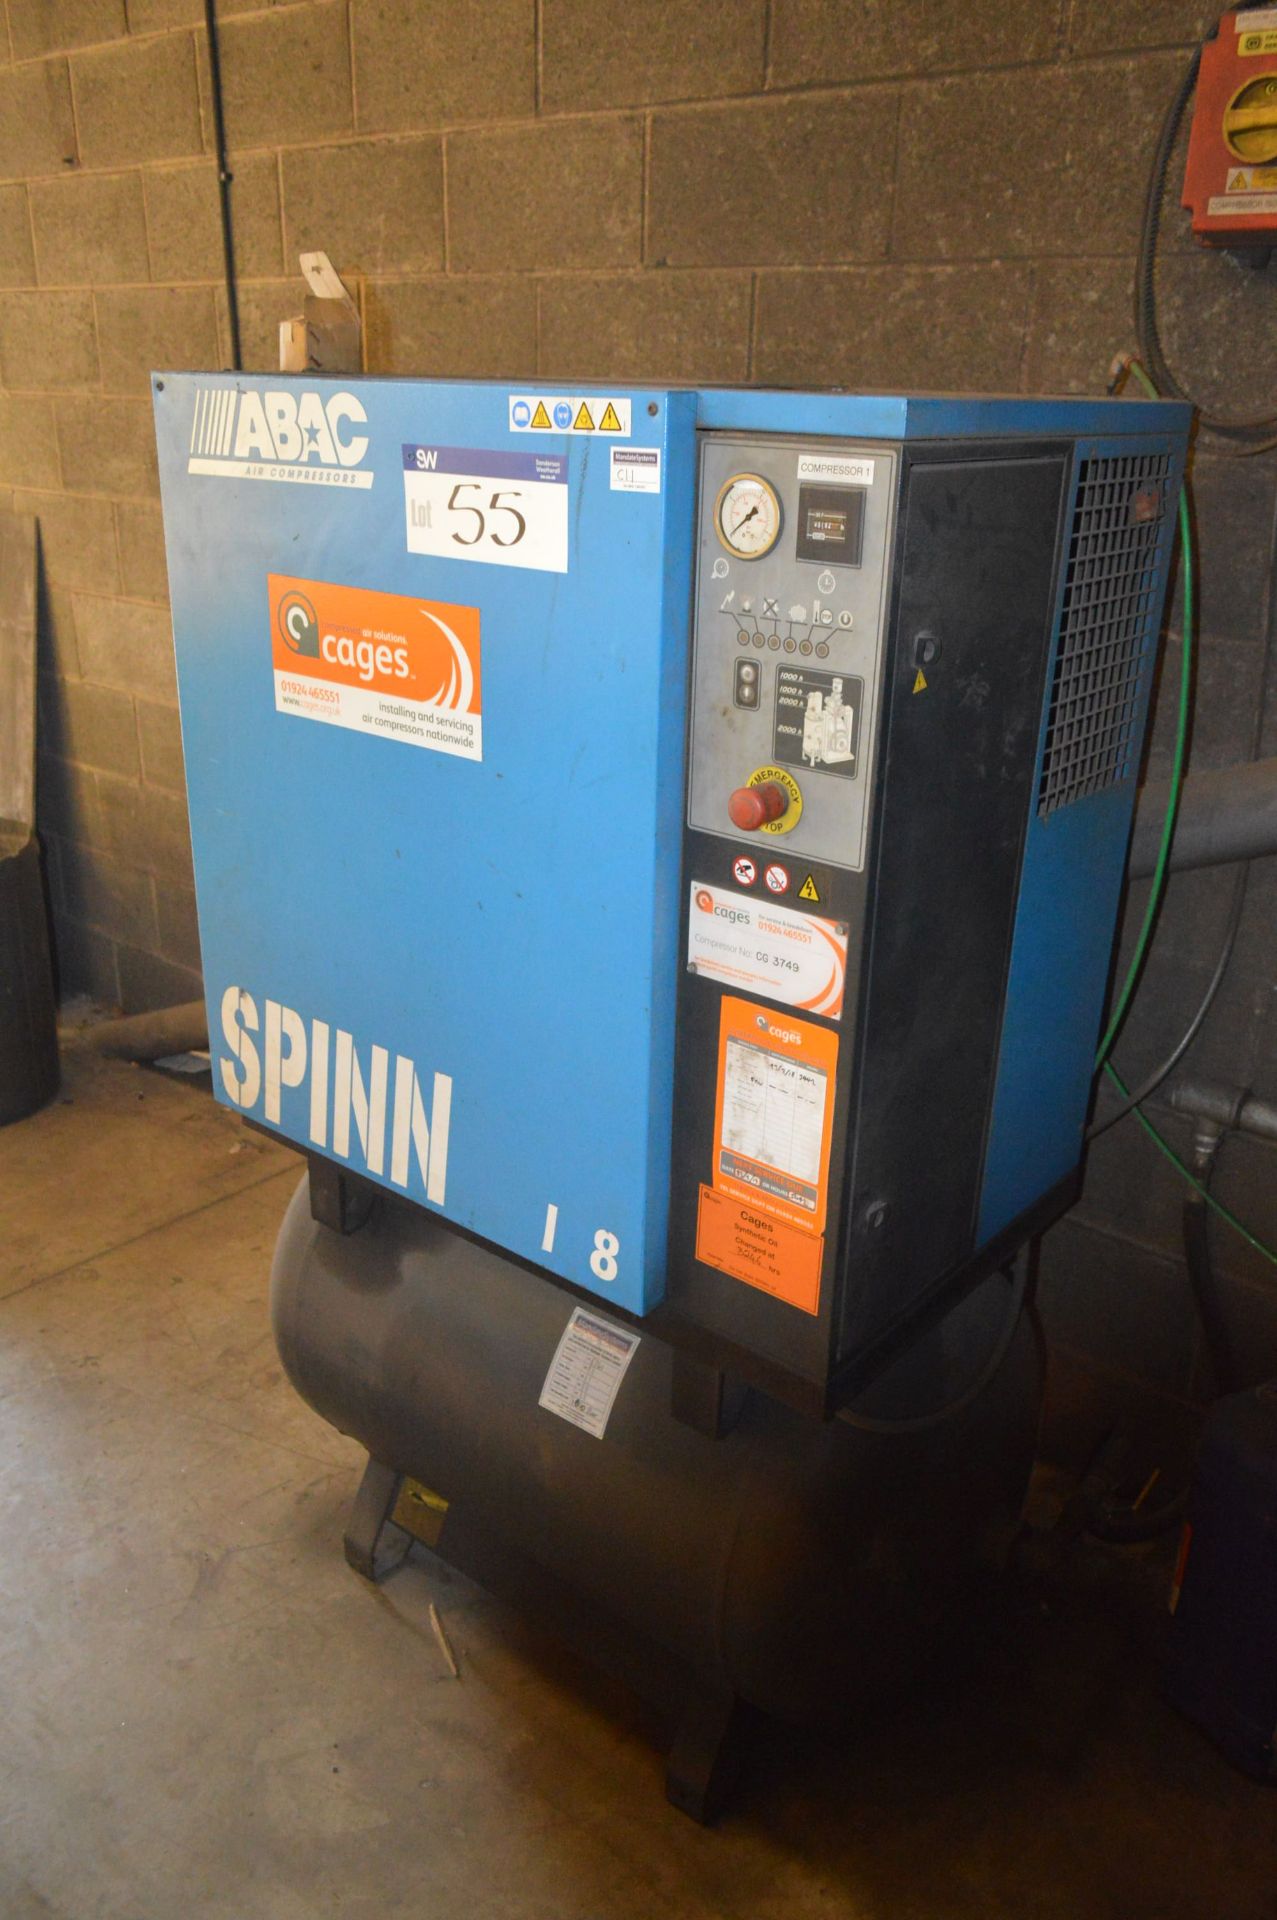 Abac Spinn 11kW Horizontal Receiver Mounted Air Compressor, serial no. ITR0132769, 1.65m³/min free